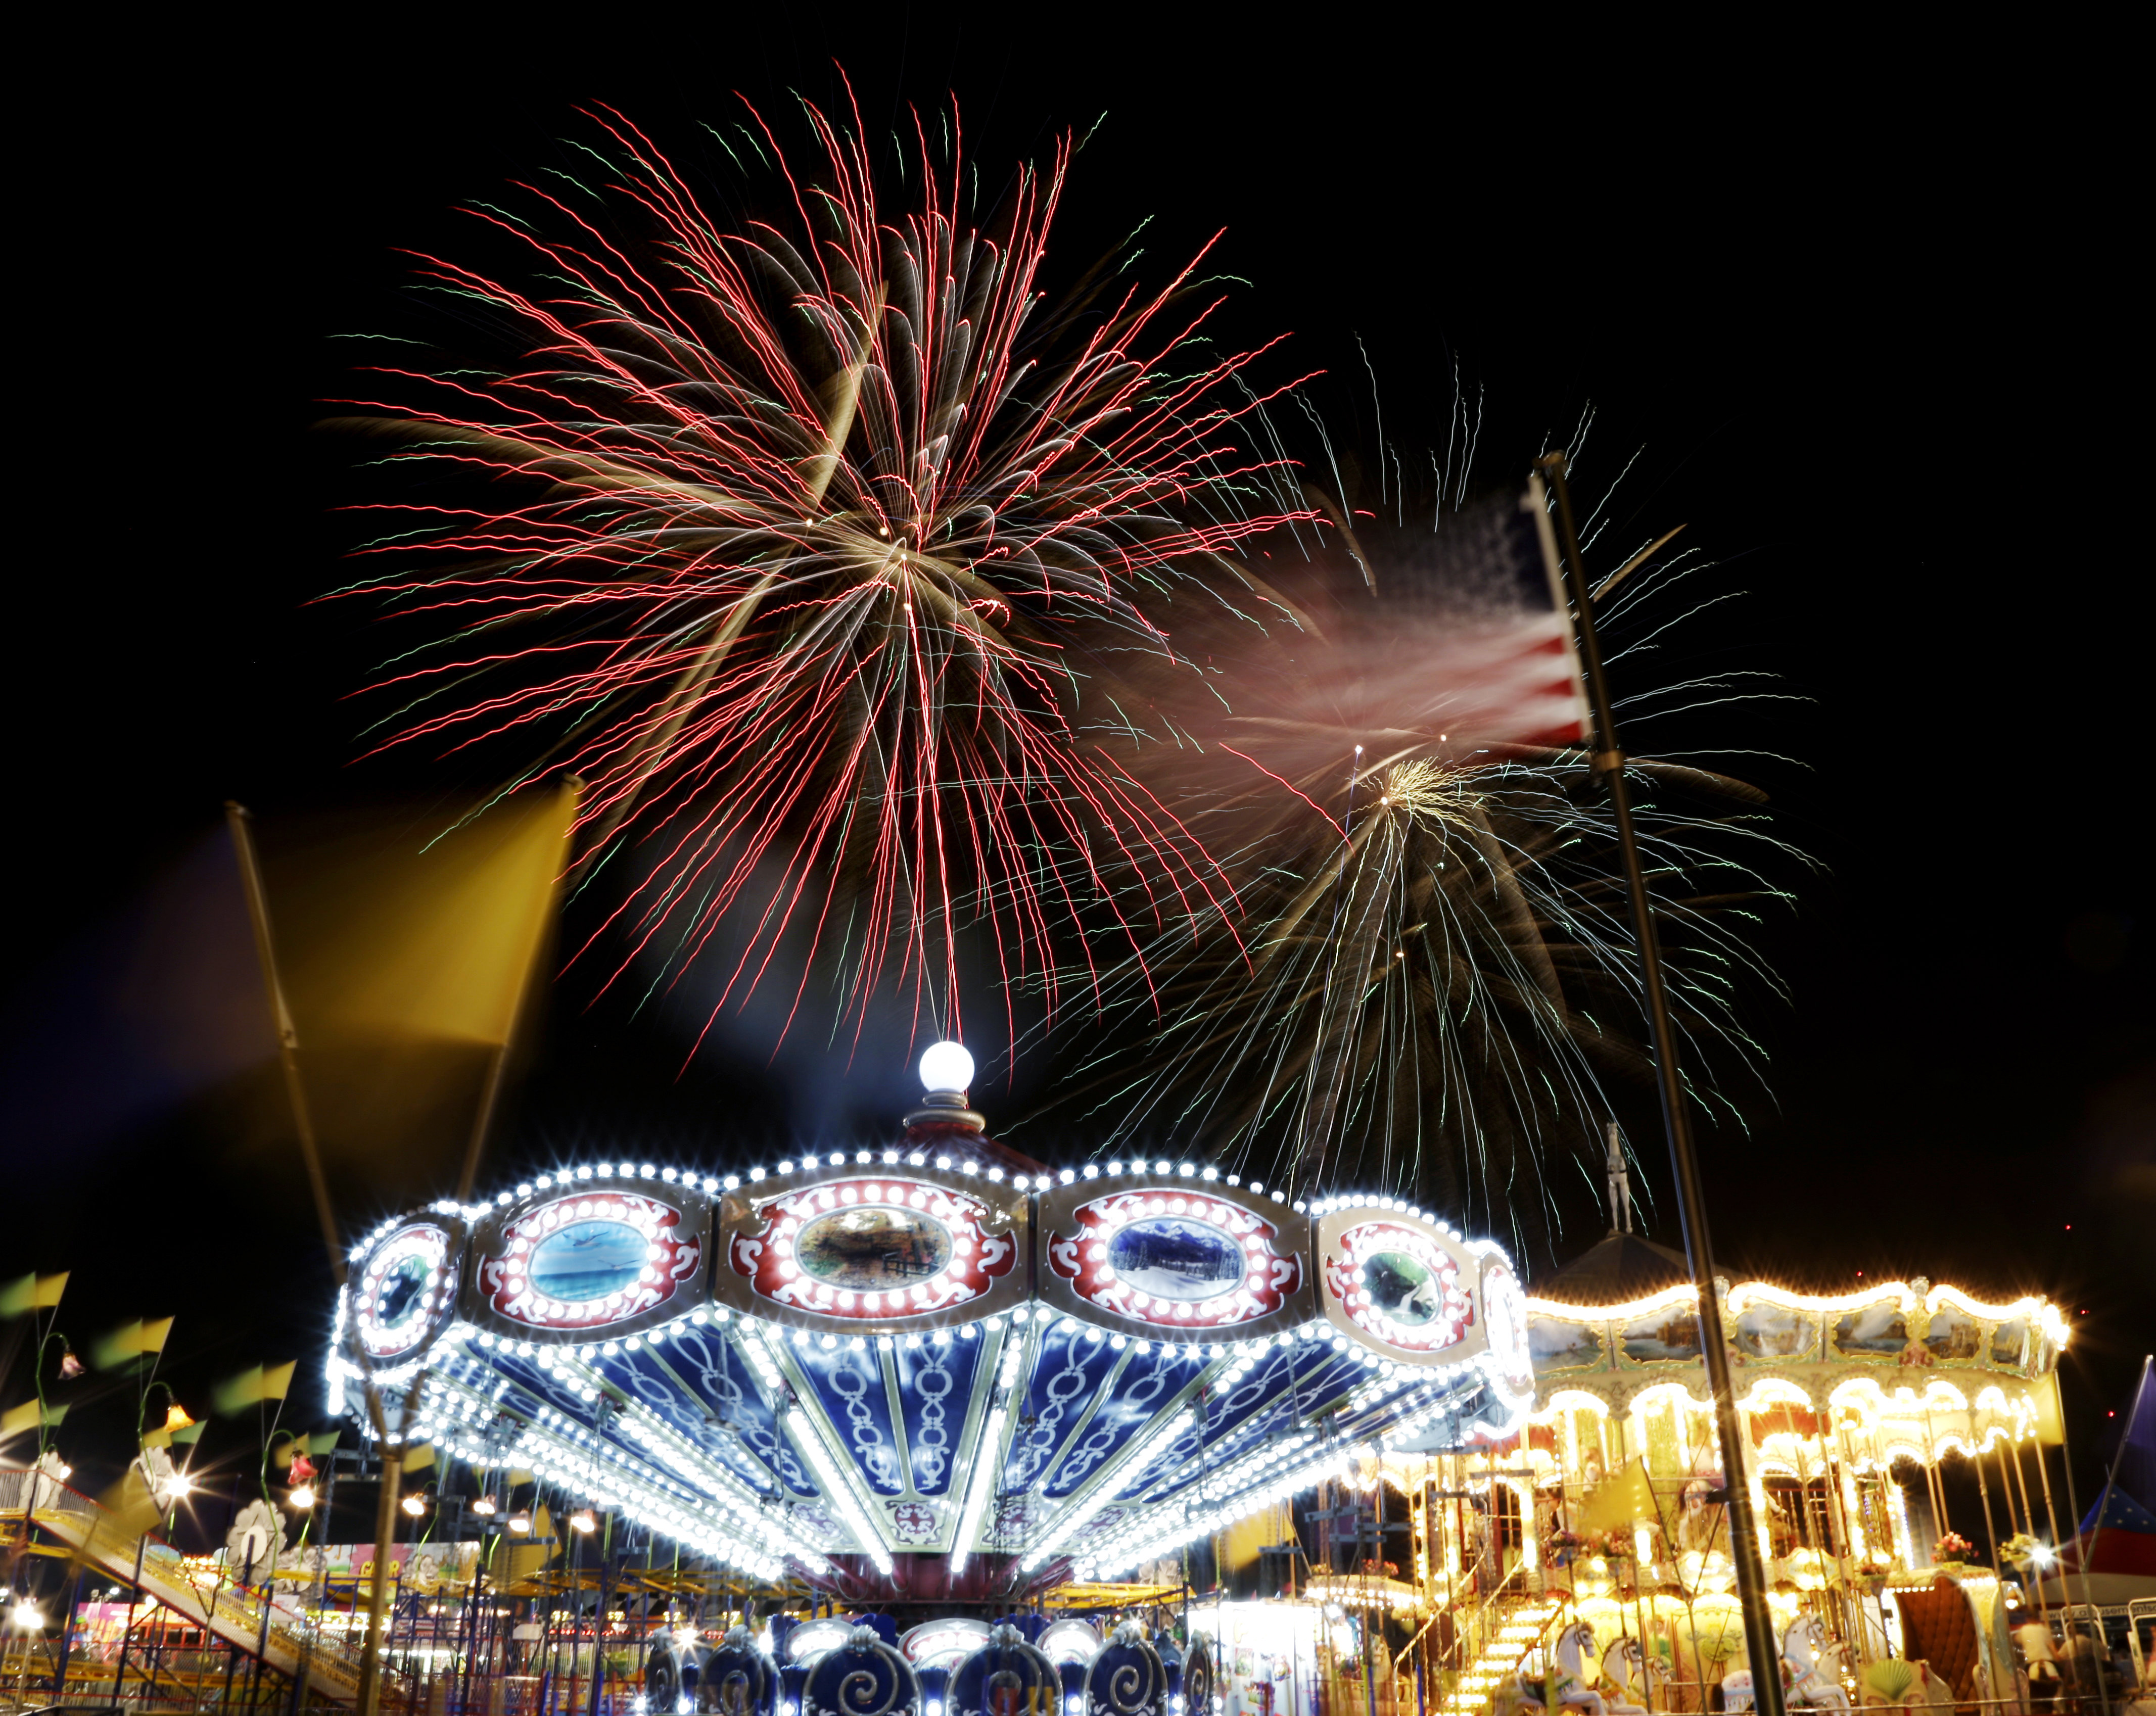 Carnival rides and fireworks at a county fair